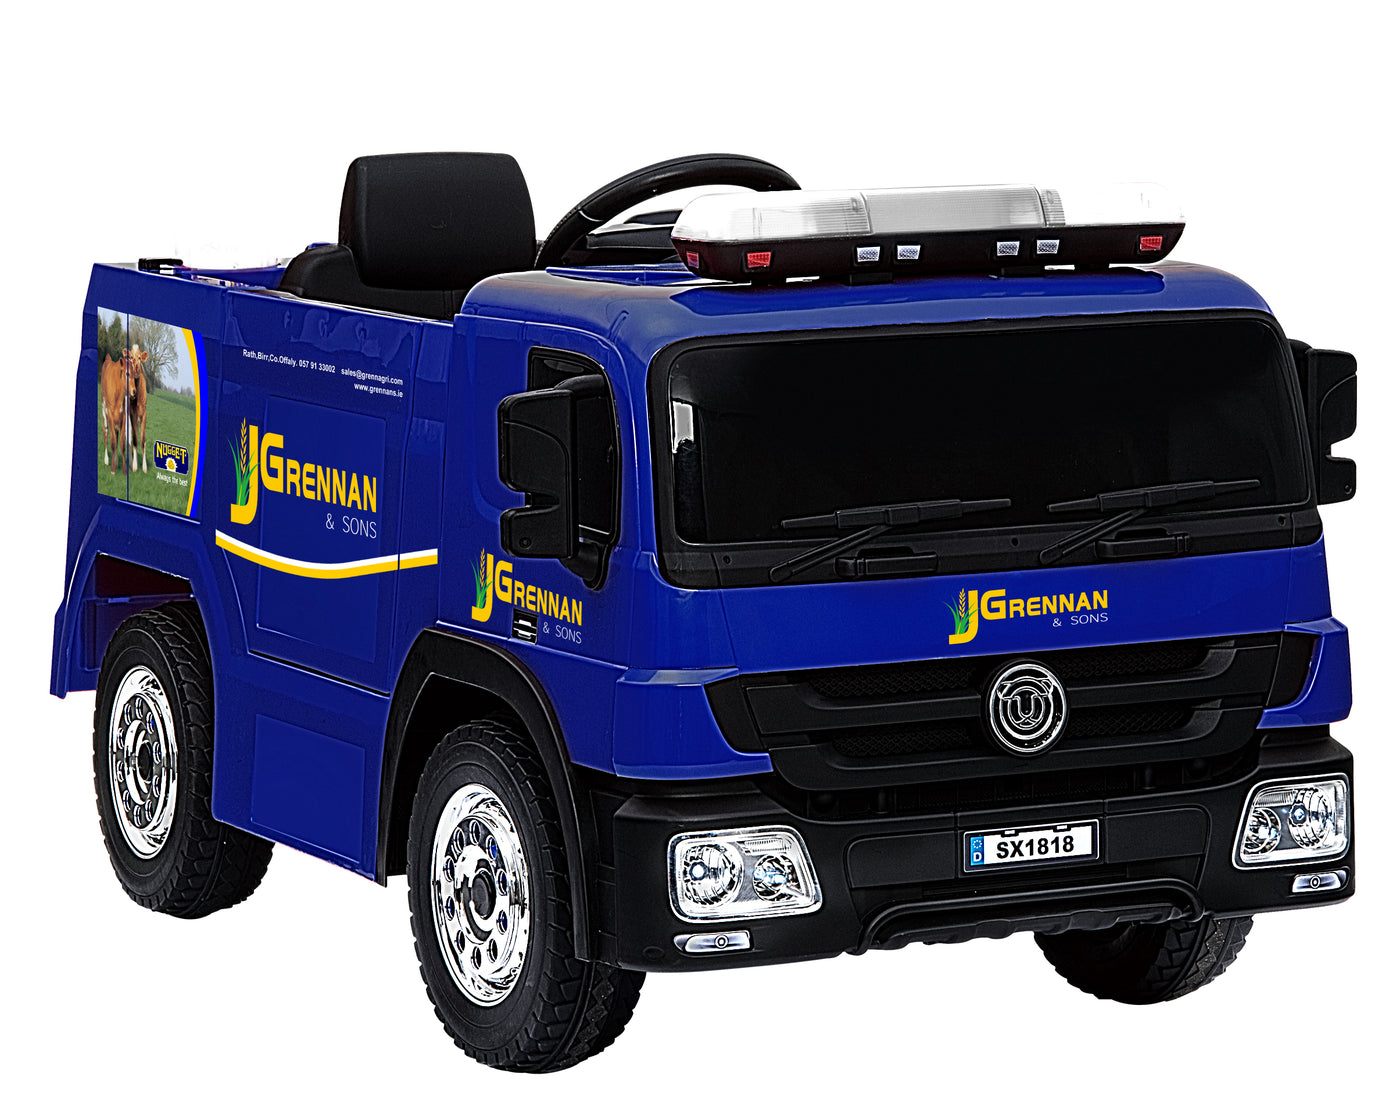 Brian Grennan Transport 12v Electric Ride-on Truck with Remote Control